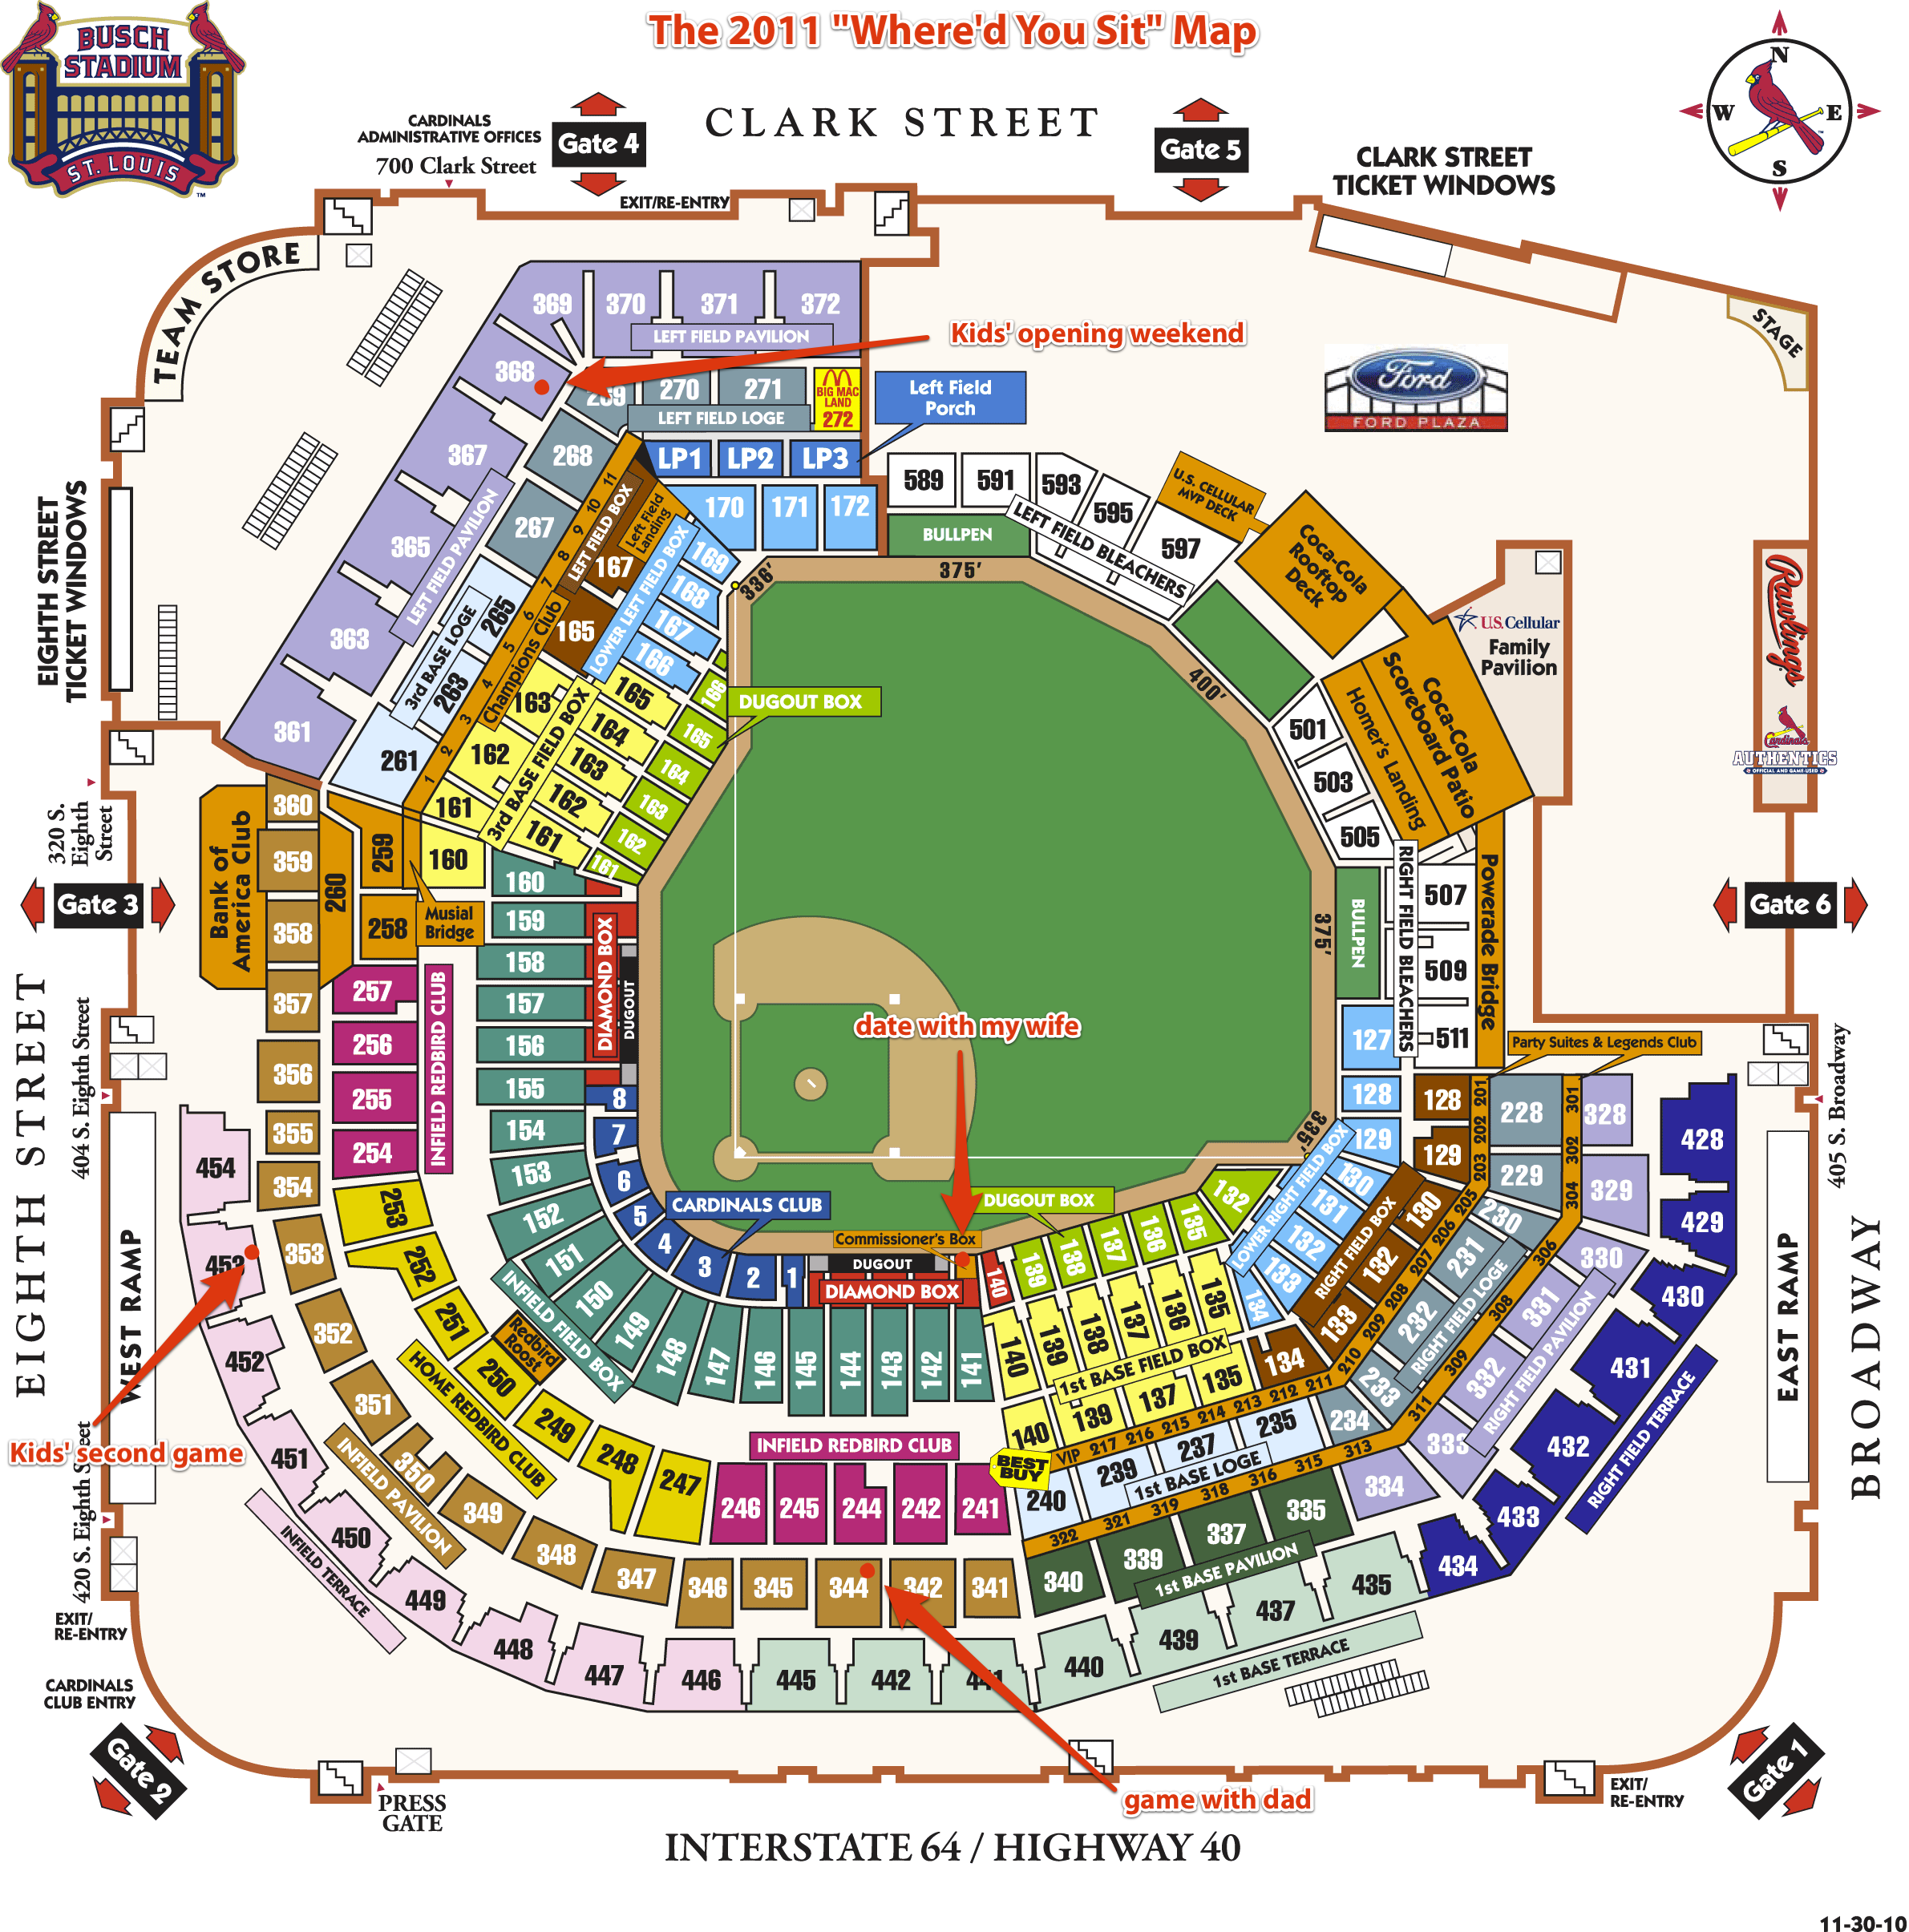 St Louis Cardinals Tickets Seating Chart